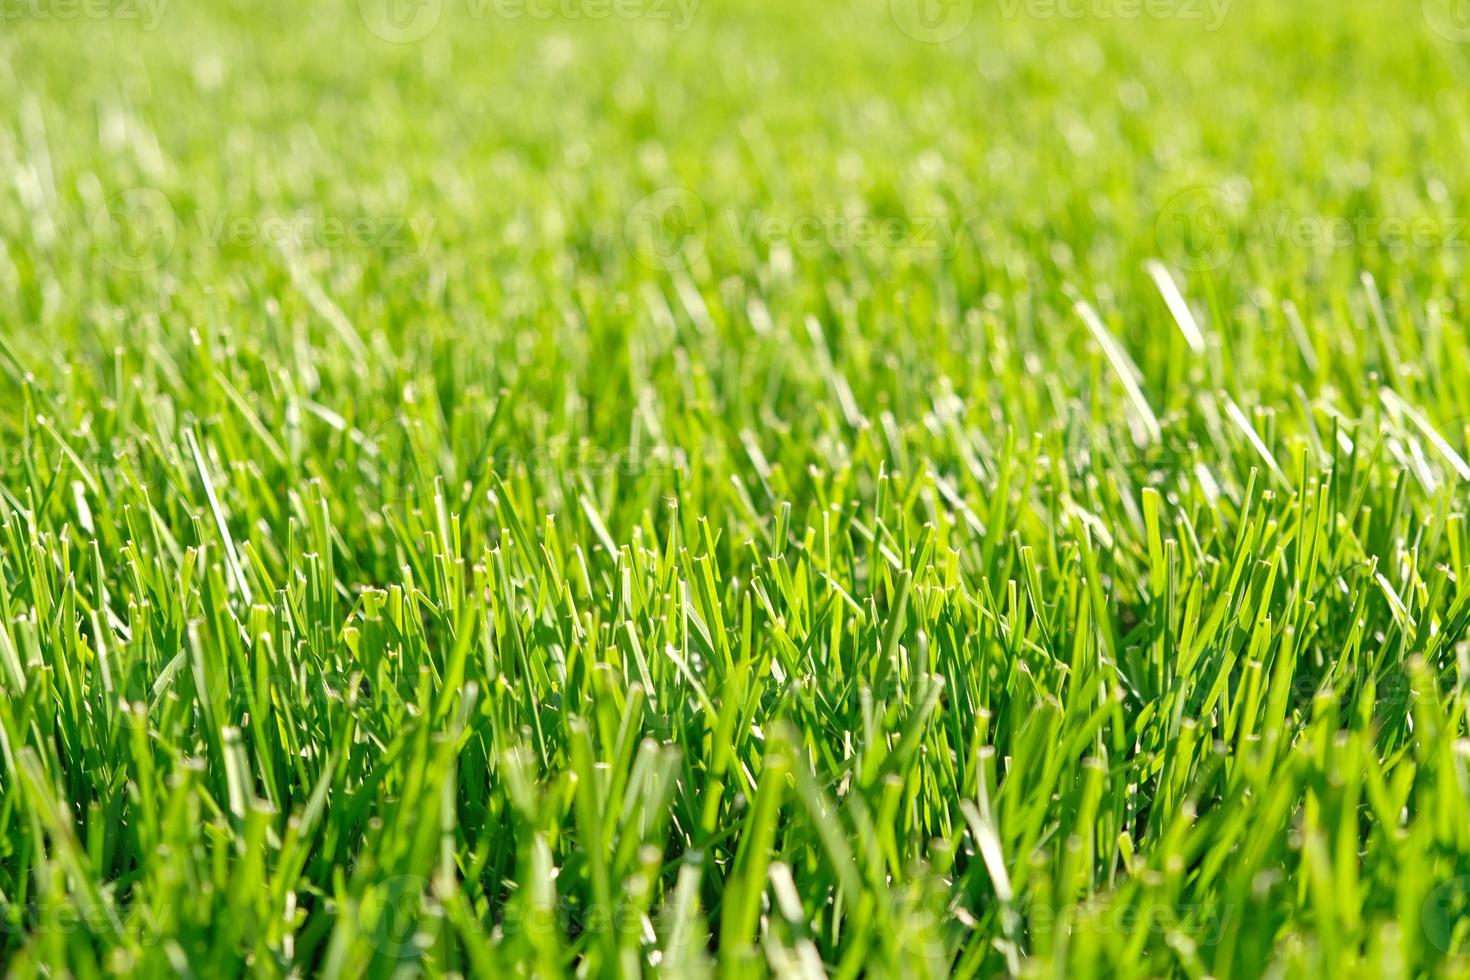 Close up green grass, natural greenery background texture of lawn garden. Ideal concept used for making green flooring, lawn for training football pitch, Grass Golf Courses, green lawn pattern. photo